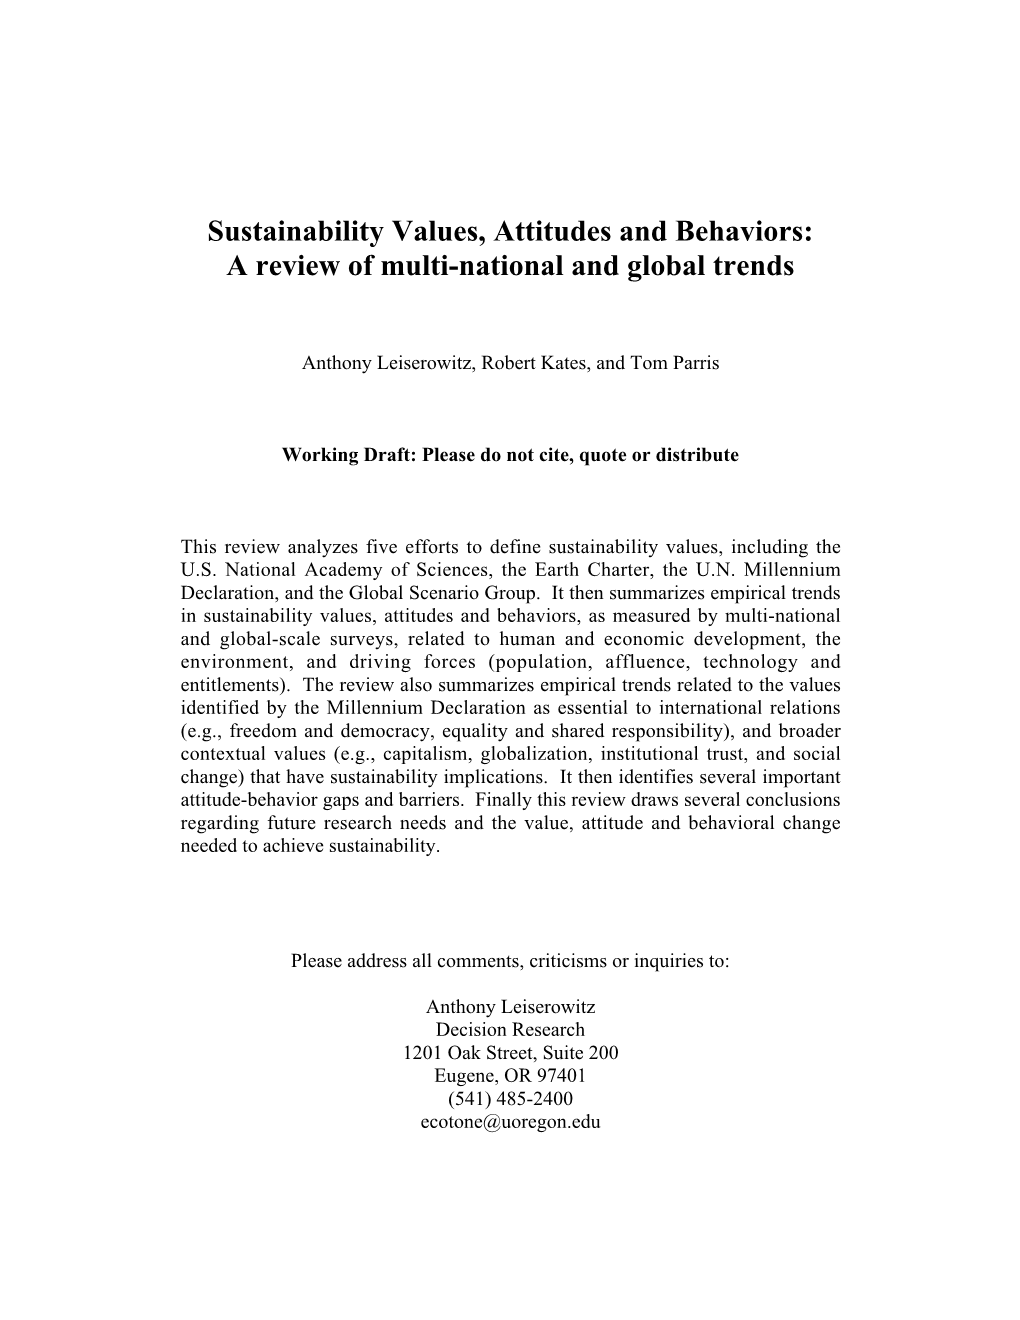 Sustainability Values, Attitudes and Behaviors: a Review of Multi-National and Global Trends